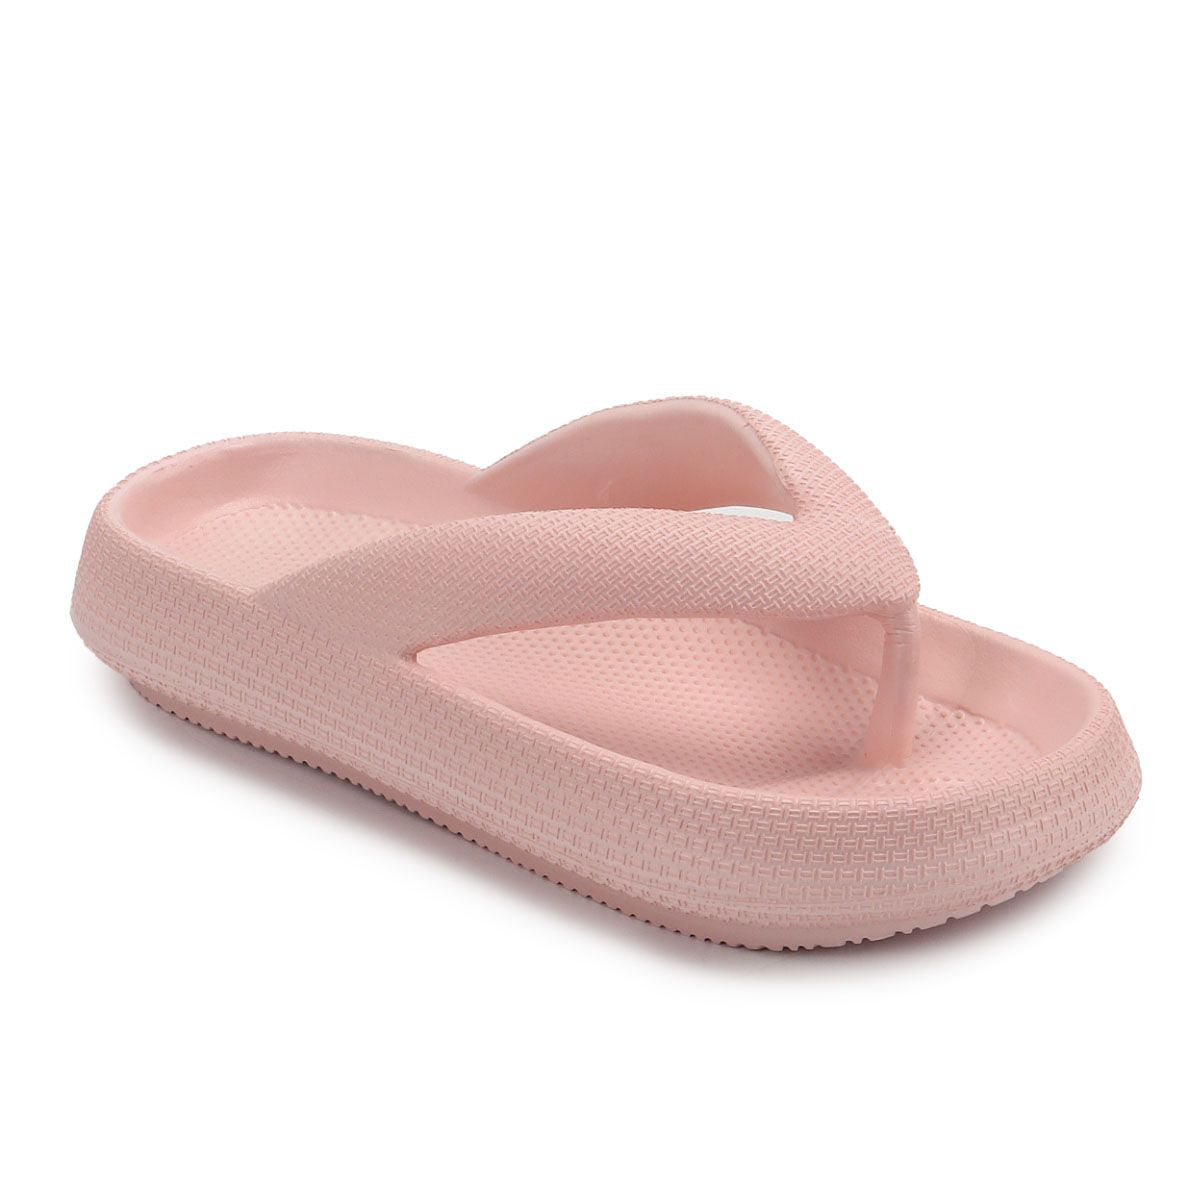 Spencer Clouds Slippers for Women and Men, Non-Slip Shower Slippers  Bathroom Slides Sandals Soft Thick Sole for Indoor and Outdoor (S, Black) -  Walmart.com